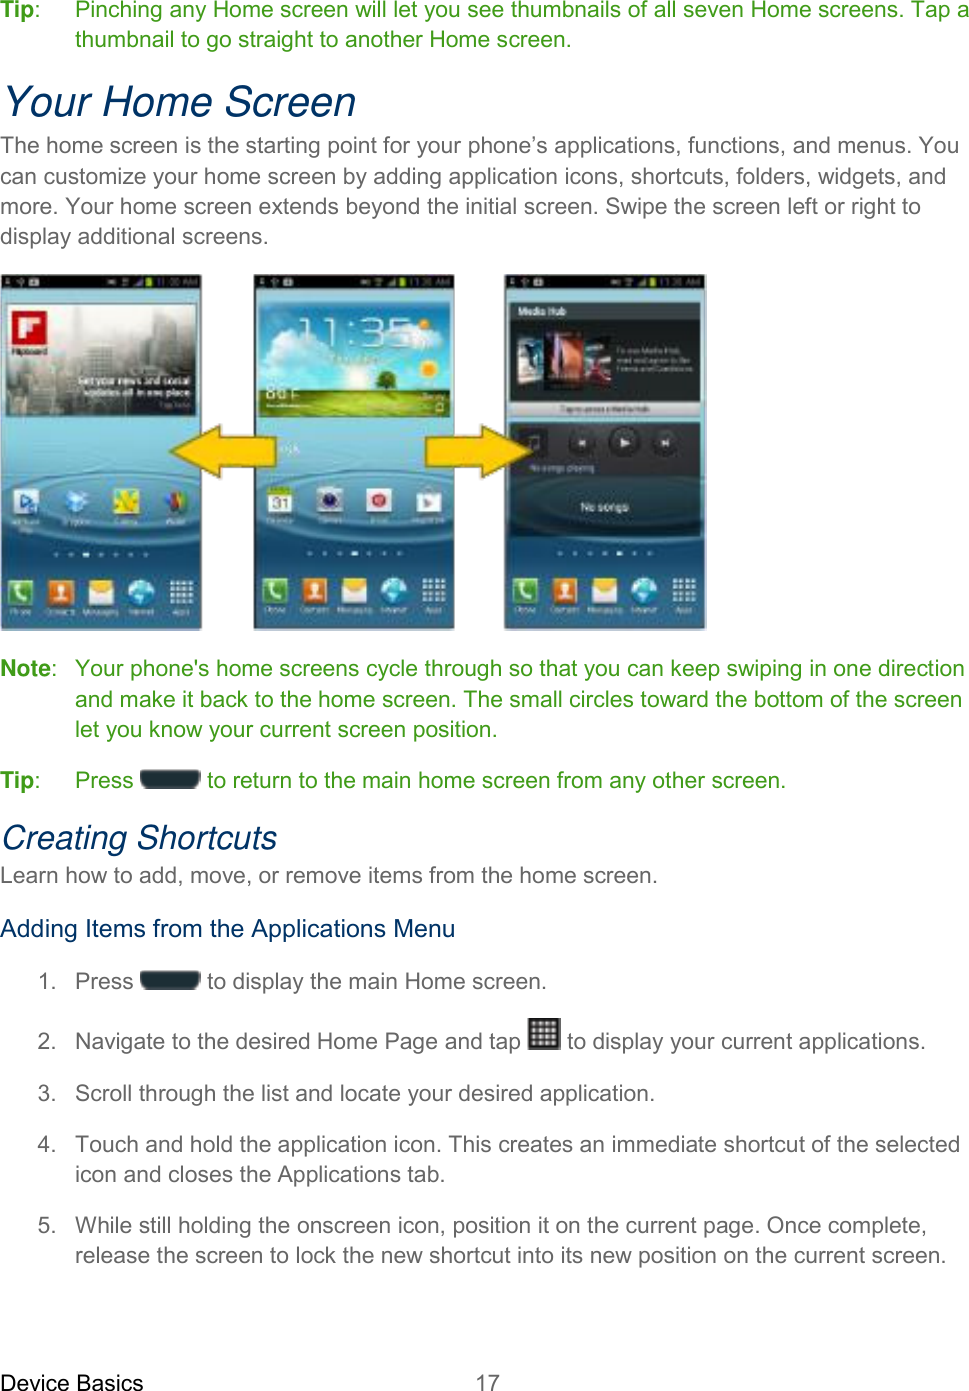 Device Basics 17   Tip:  Pinching any Home screen will let you see thumbnails of all seven Home screens. Tap a thumbnail to go straight to another Home screen. Your Home Screen The home screen is the starting point for your phone’s applications, functions, and menus. You can customize your home screen by adding application icons, shortcuts, folders, widgets, and more. Your home screen extends beyond the initial screen. Swipe the screen left or right to display additional screens.  Note:   Your phone&apos;s home screens cycle through so that you can keep swiping in one direction and make it back to the home screen. The small circles toward the bottom of the screen let you know your current screen position.  Tip:   Press   to return to the main home screen from any other screen. Creating Shortcuts Learn how to add, move, or remove items from the home screen. Adding Items from the Applications Menu 1.  Press   to display the main Home screen.  2.  Navigate to the desired Home Page and tap  to display your current applications. 3.  Scroll through the list and locate your desired application. 4.  Touch and hold the application icon. This creates an immediate shortcut of the selected icon and closes the Applications tab. 5.  While still holding the onscreen icon, position it on the current page. Once complete, release the screen to lock the new shortcut into its new position on the current screen. 